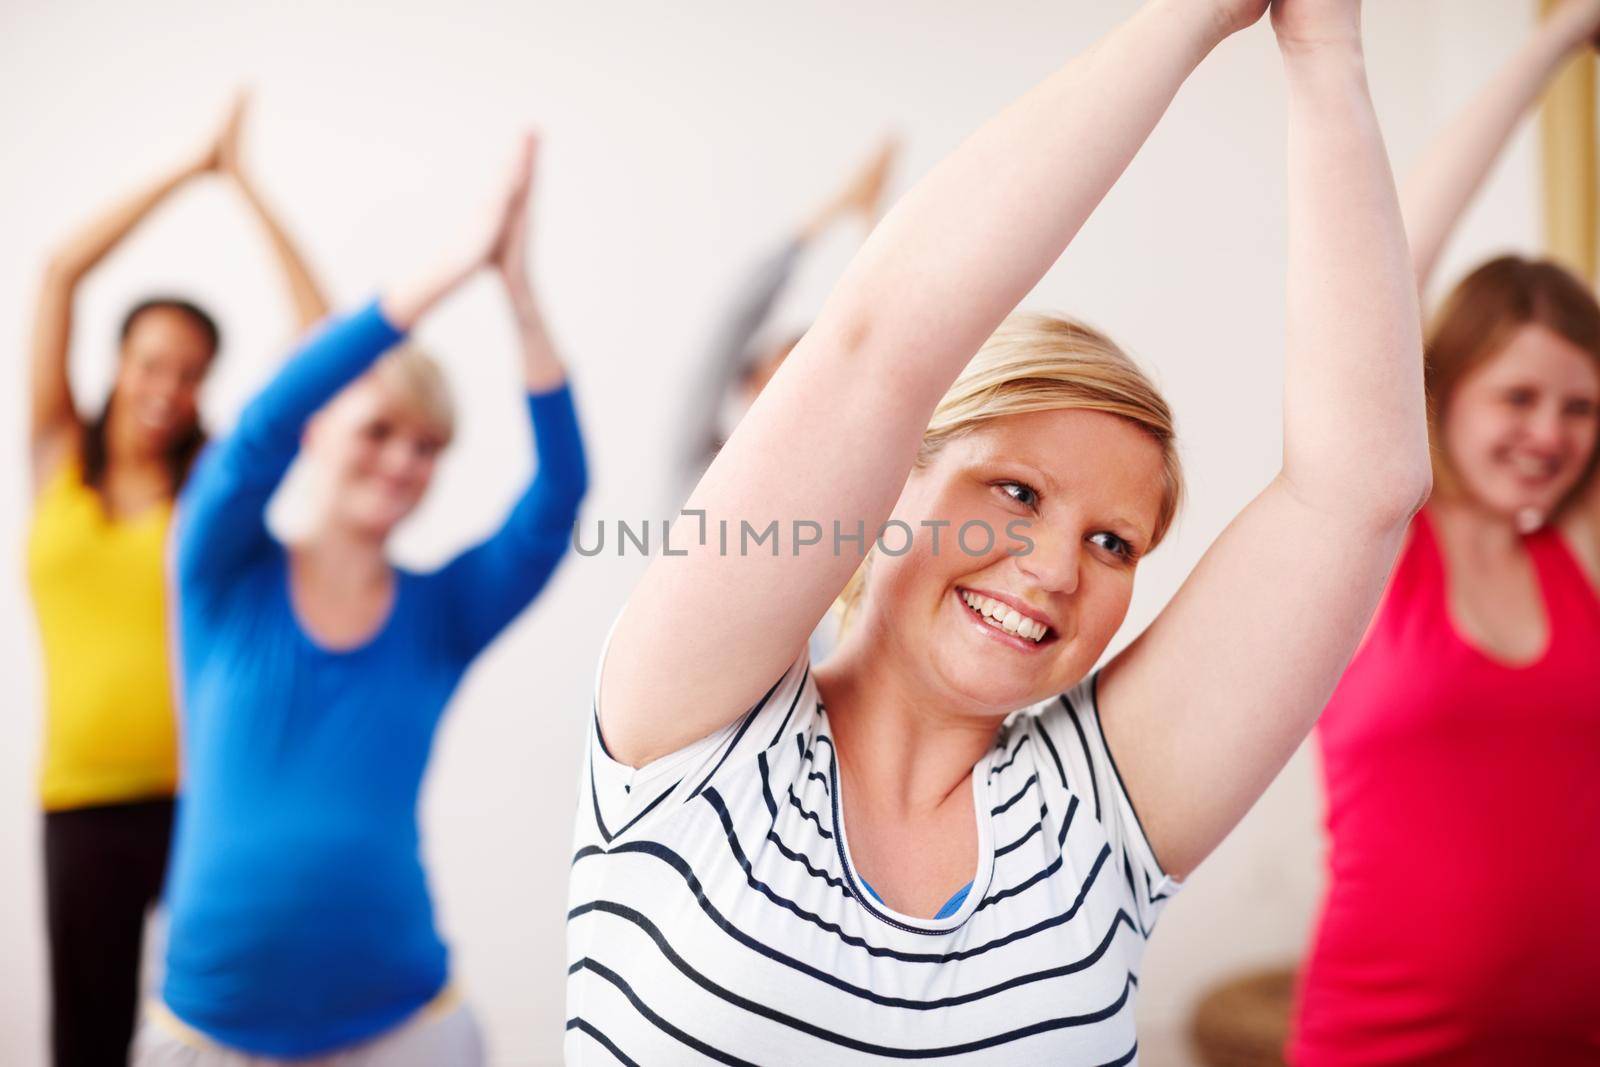 Joyful yoga. A multi-ethnic group of pregnant women doing exercises with their arms stretched upwards